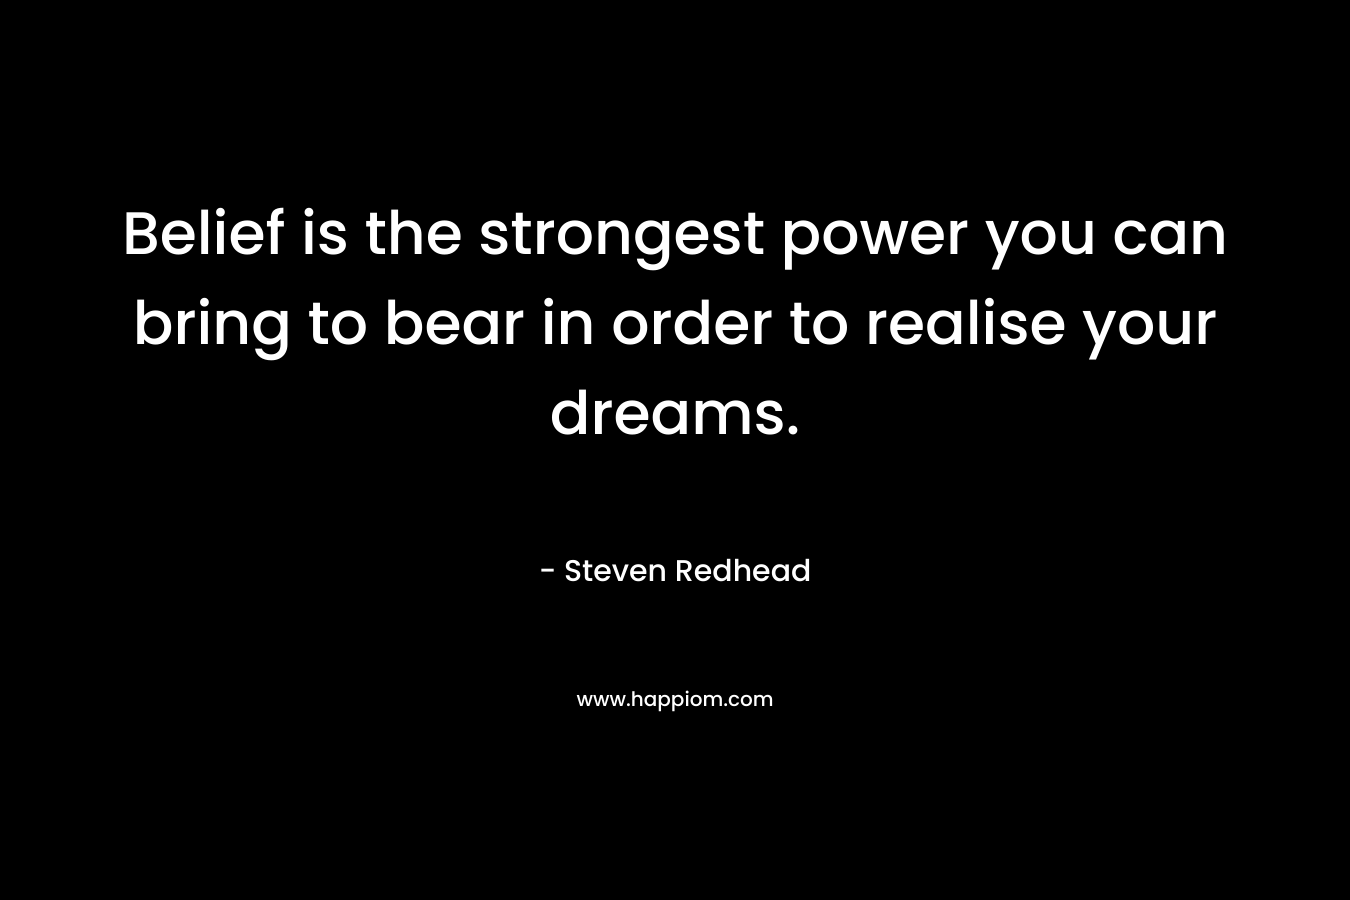 Belief is the strongest power you can bring to bear in order to realise your dreams.